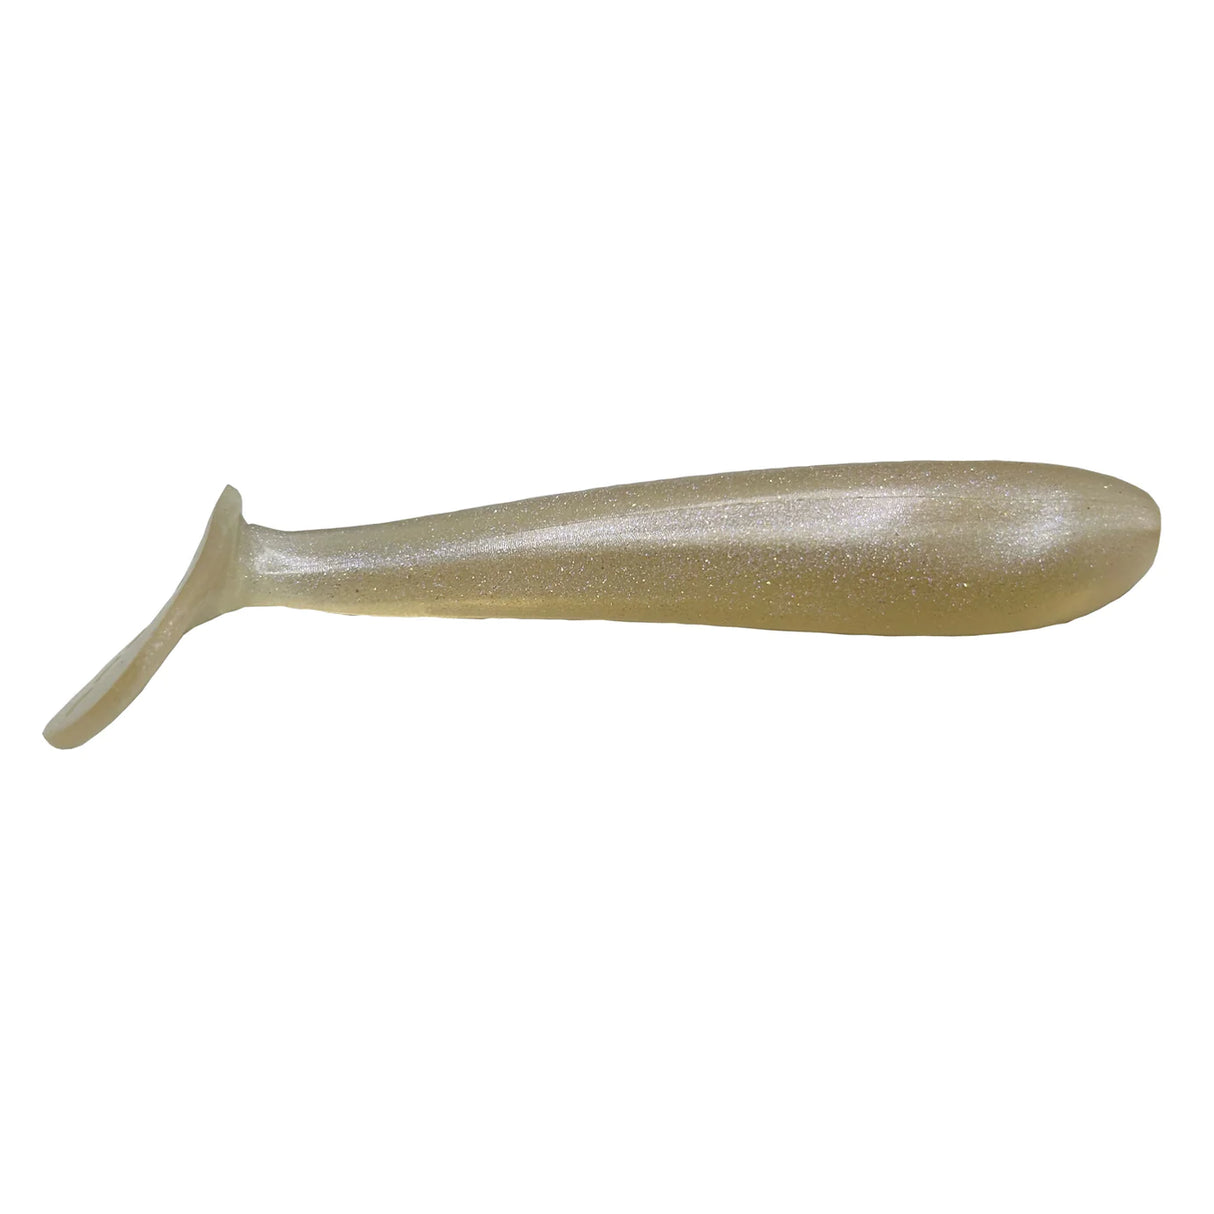 GRAVITY TACKLE PADDLETAIL 5 1/4"